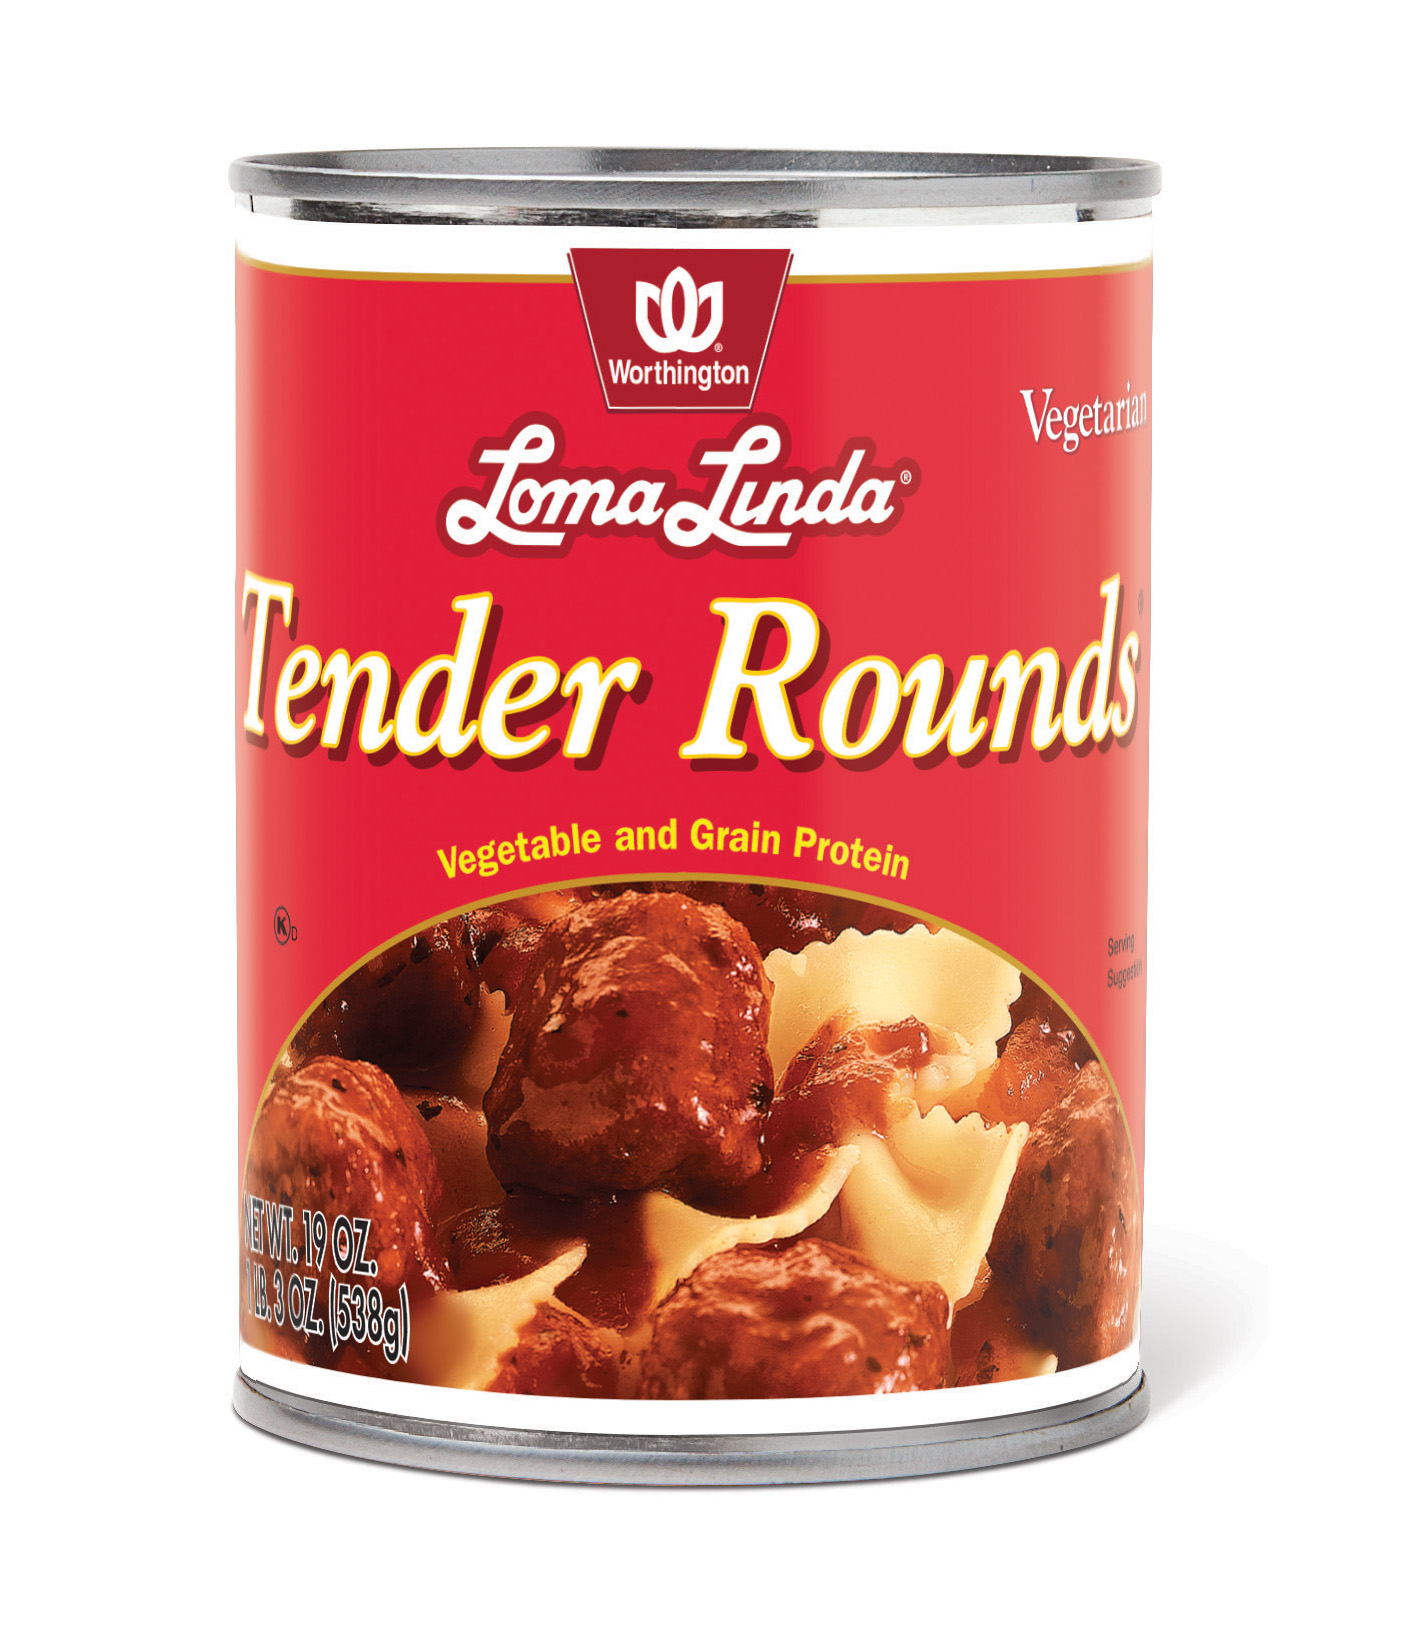 Tender Rounds